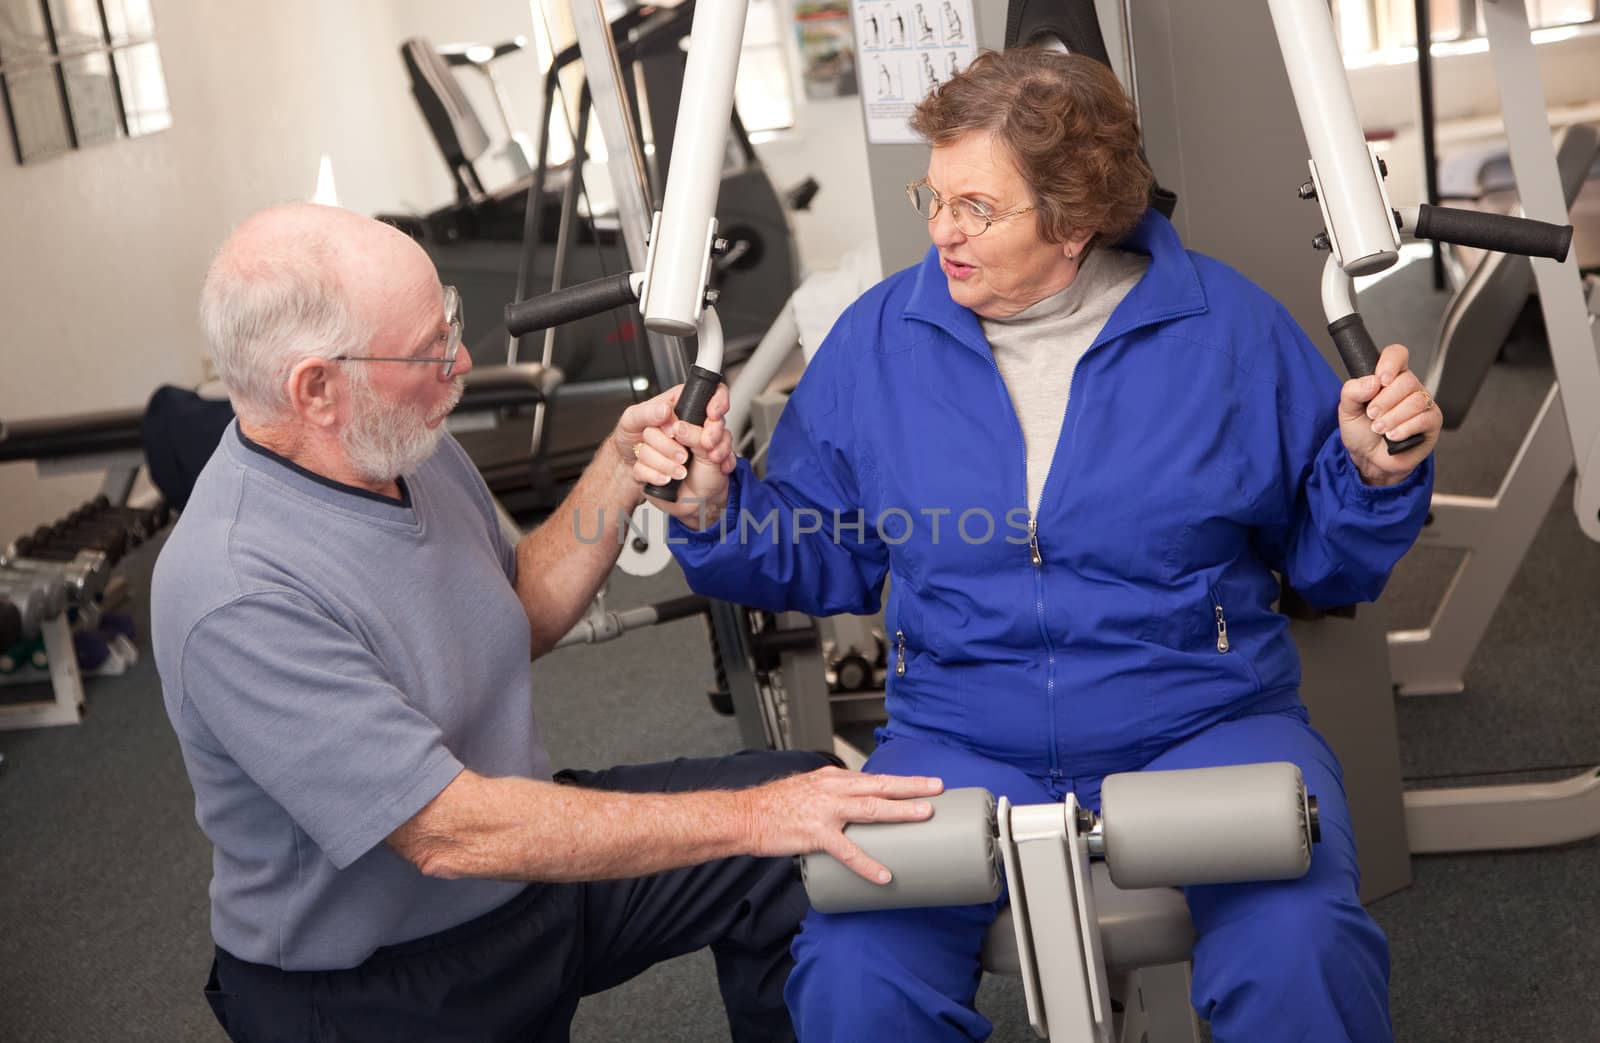 Senior Adult Couple in the Gym by Feverpitched